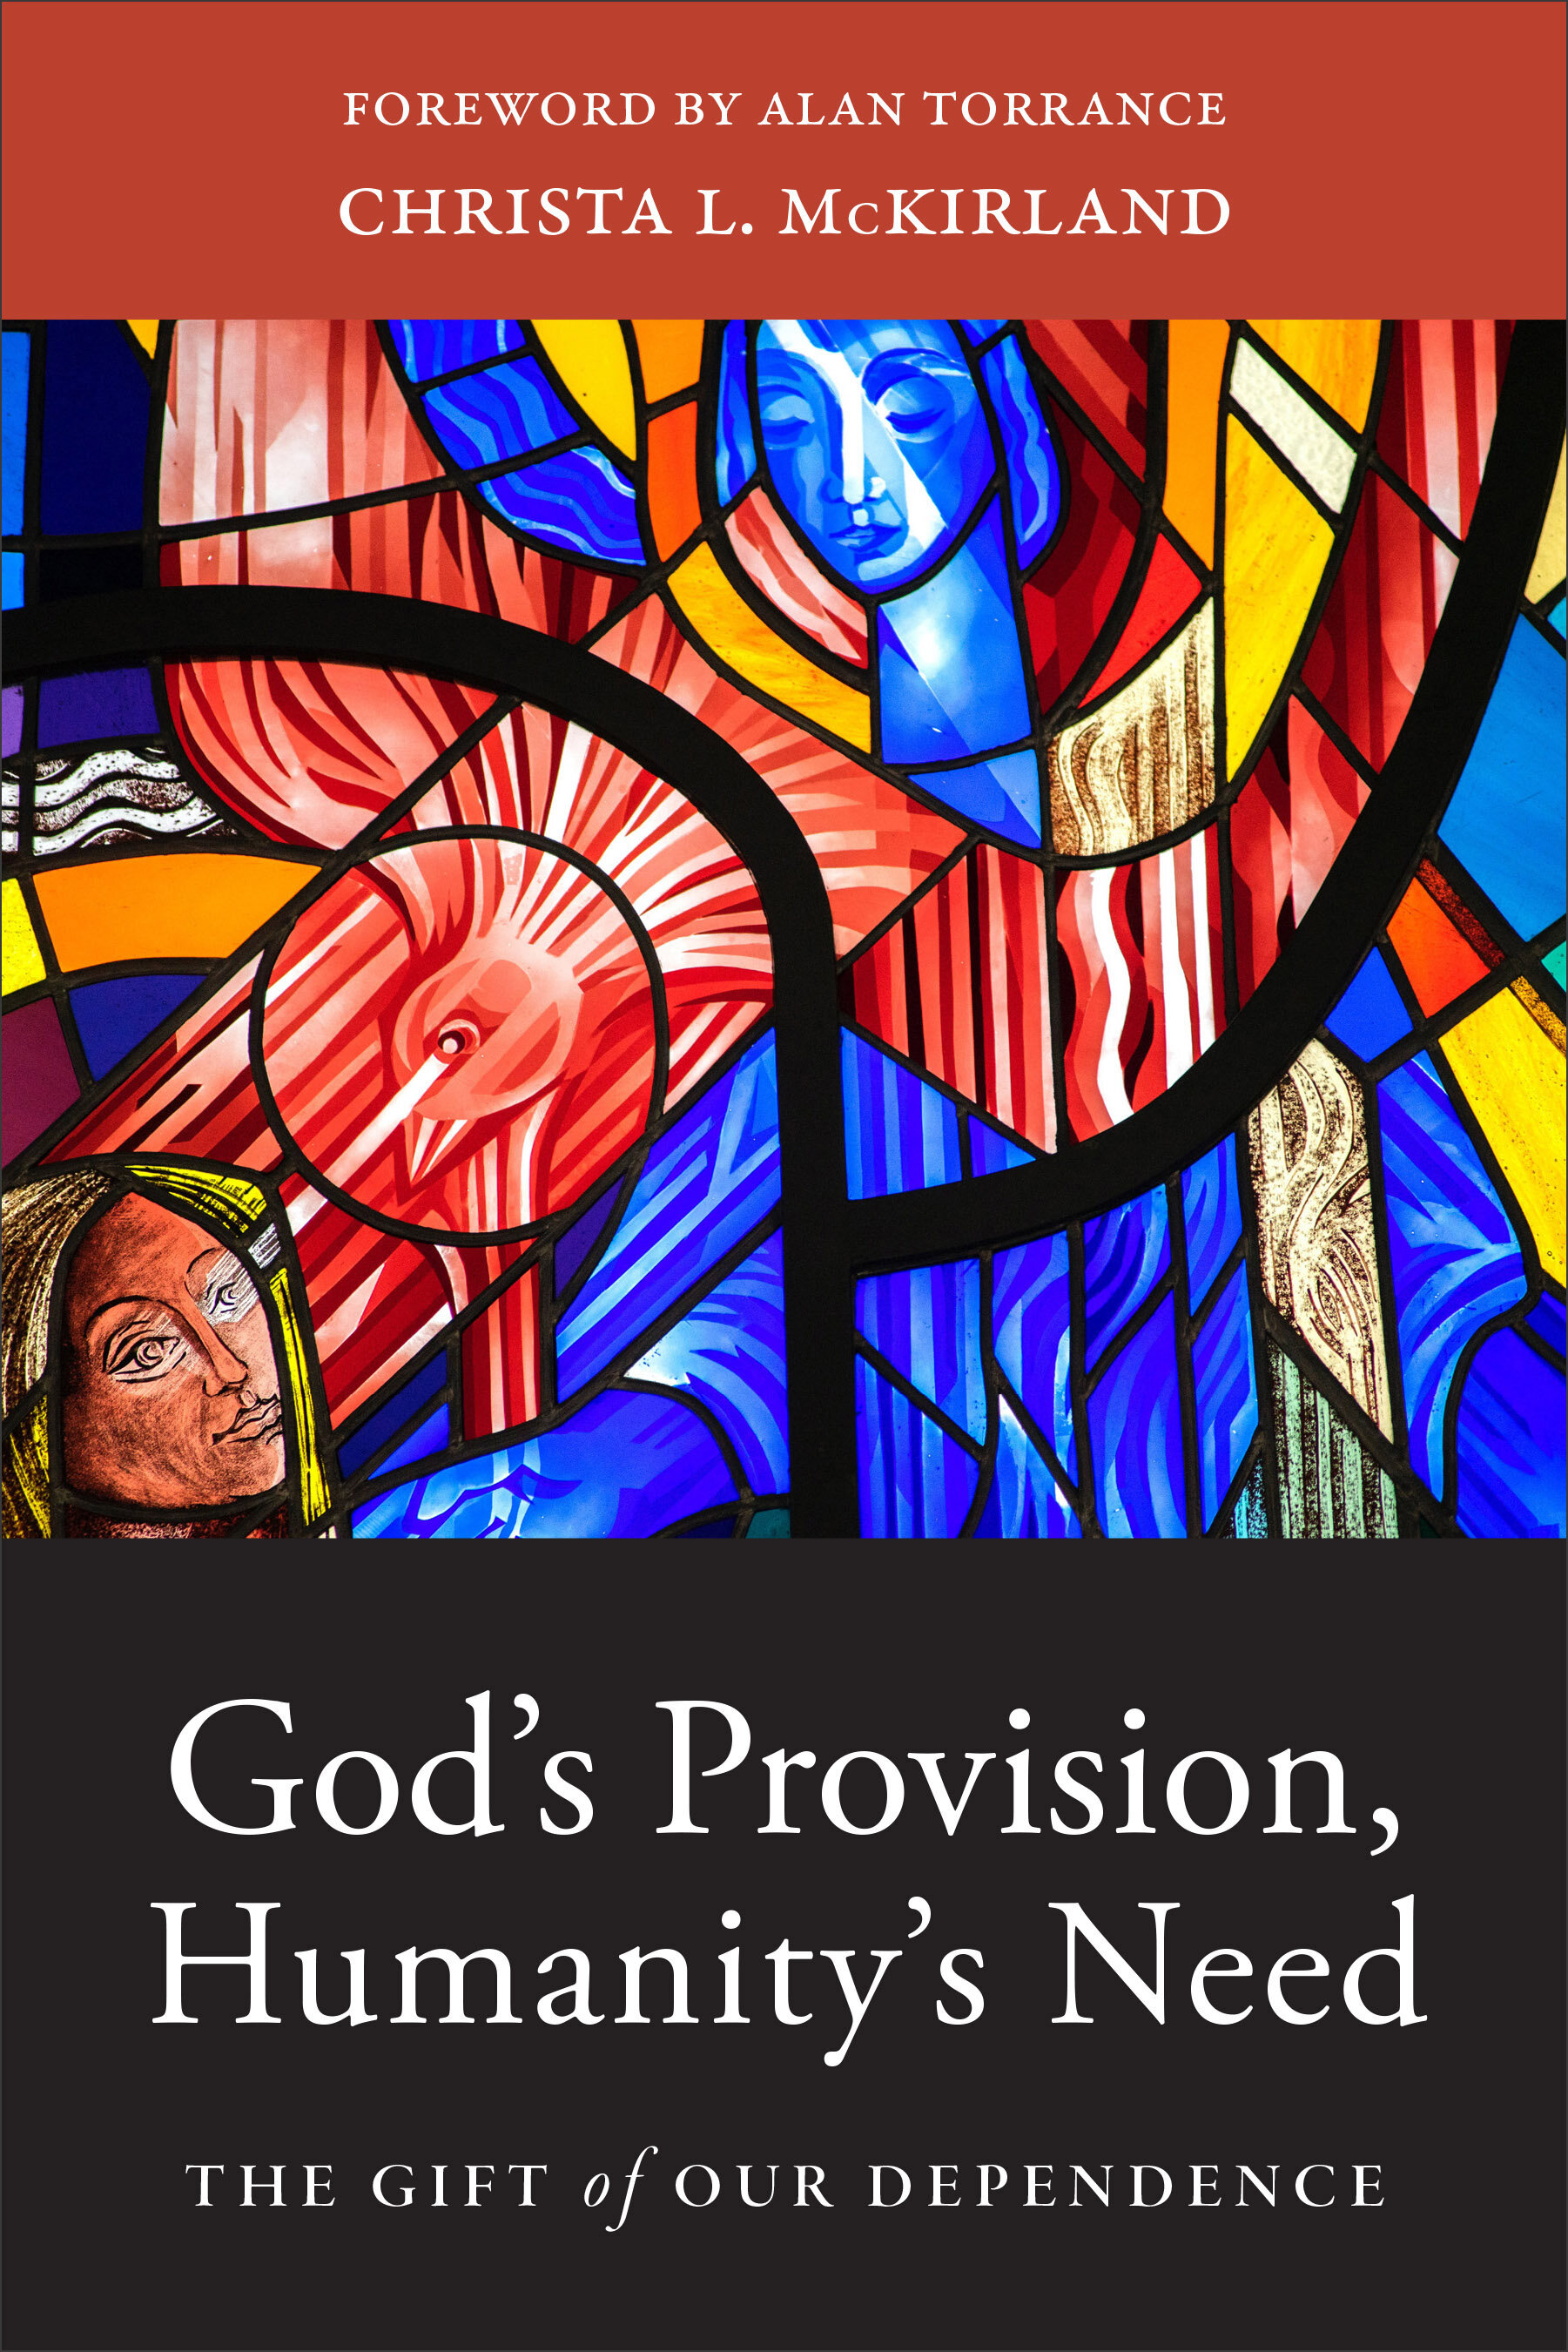 God’s Provision, Humanity’s Need: The Gift of Our Dependence